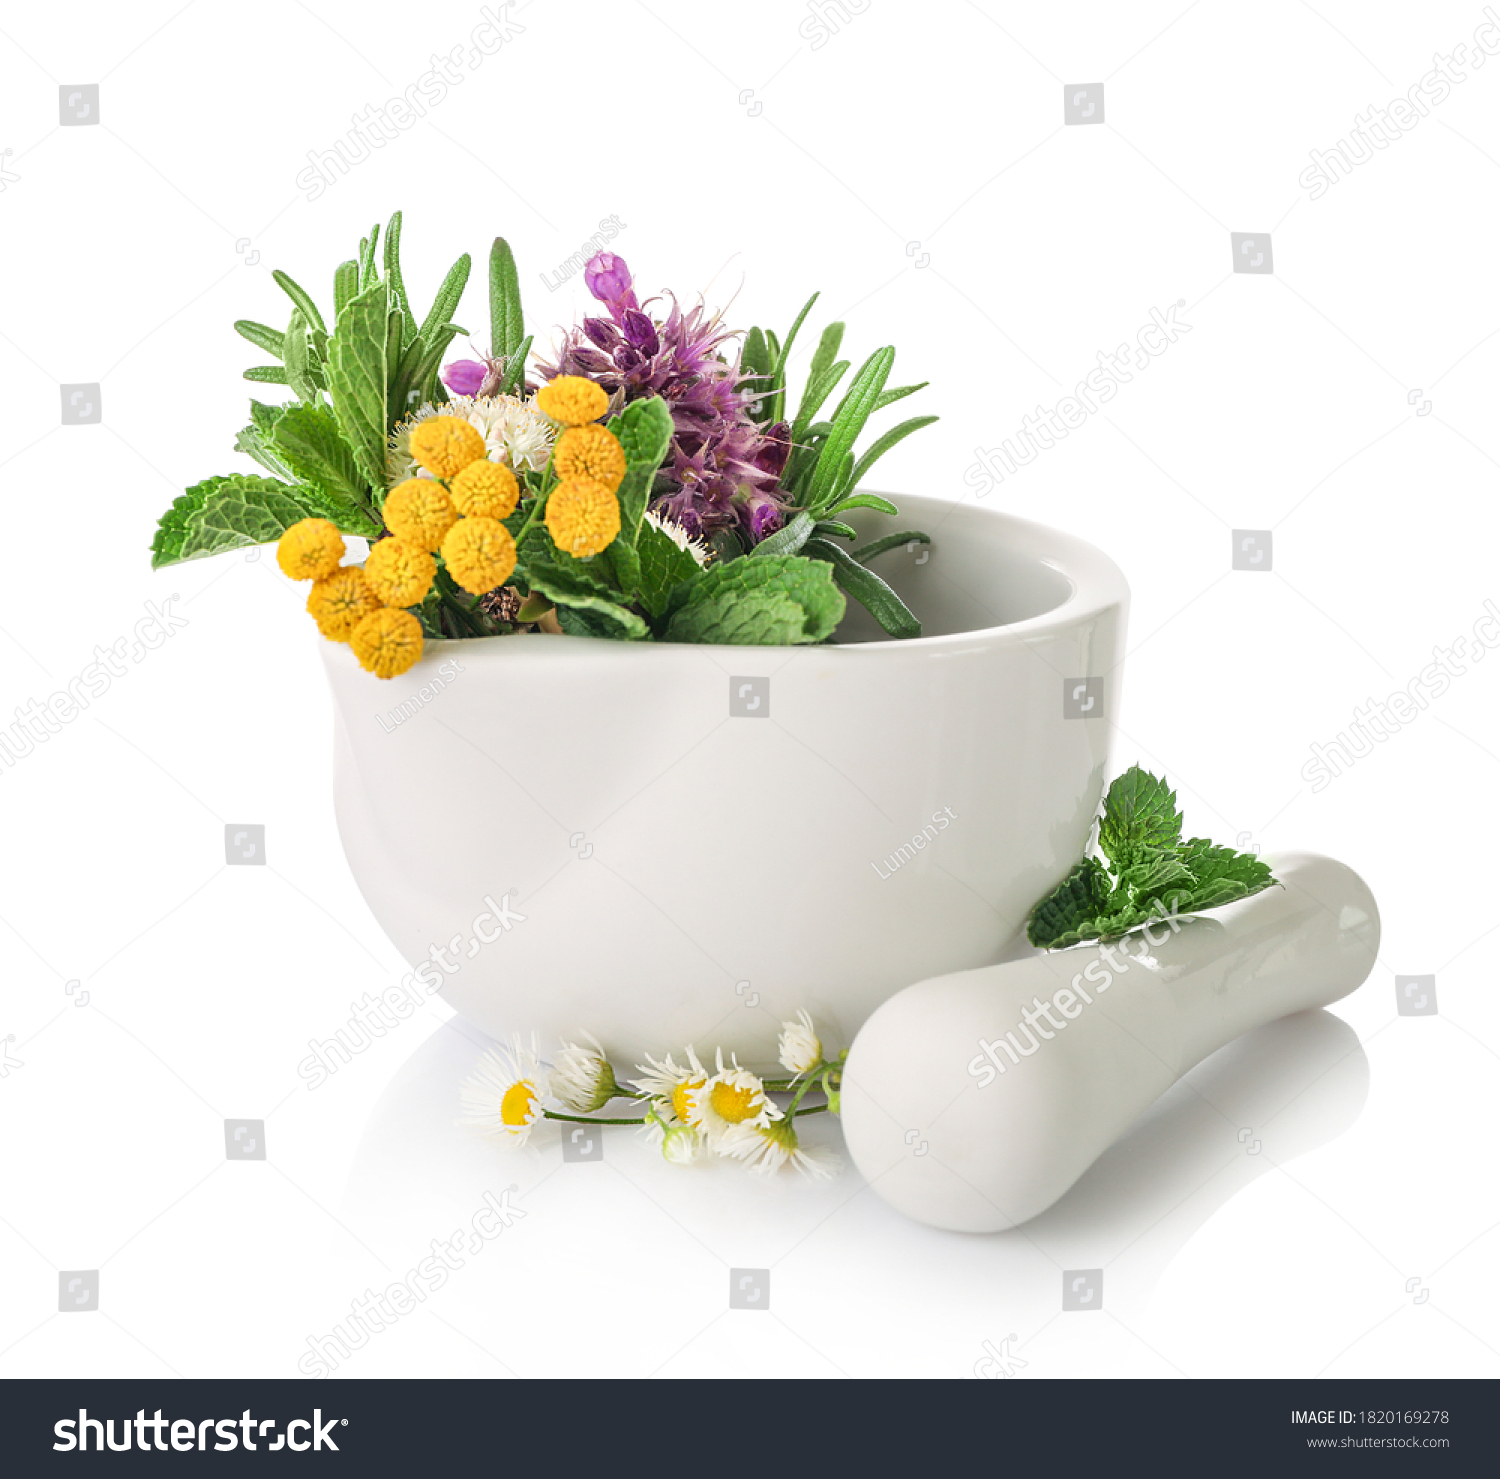 Medicinal herbs in mortar with pestle isolated on white background. Herbal medicine concept. #1820169278